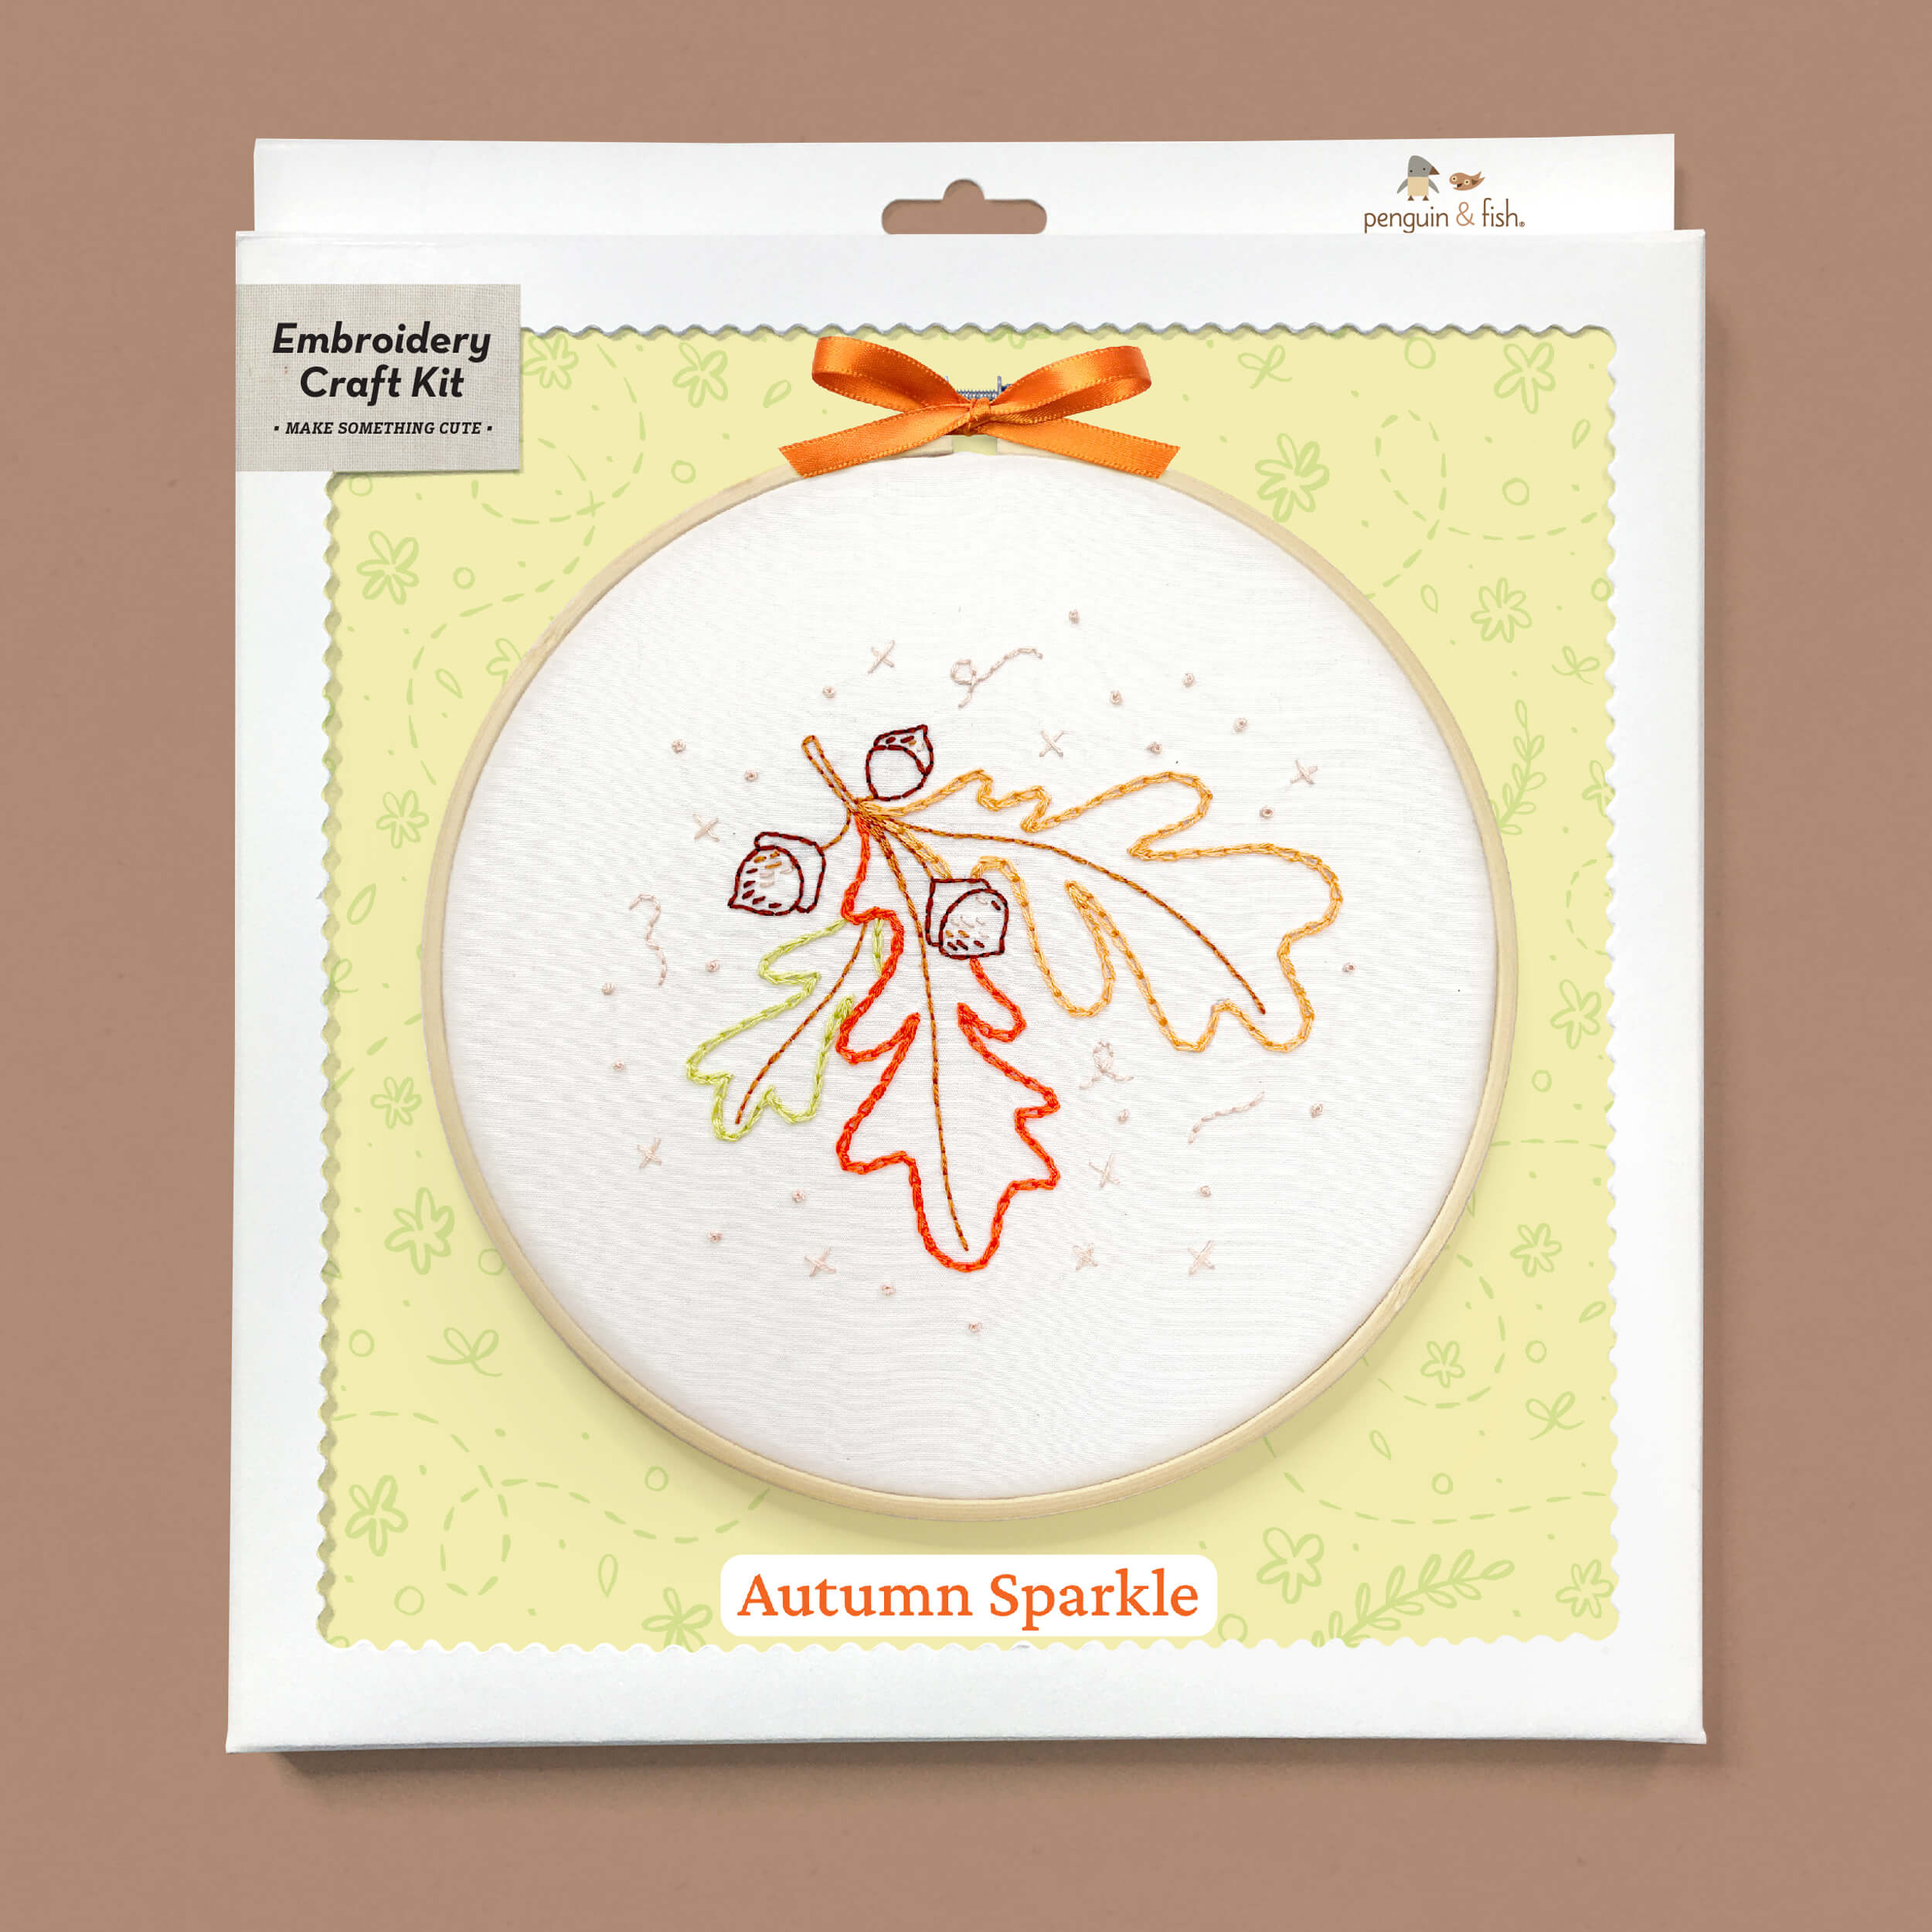 Autumn Sparkle embroidery kit in a box